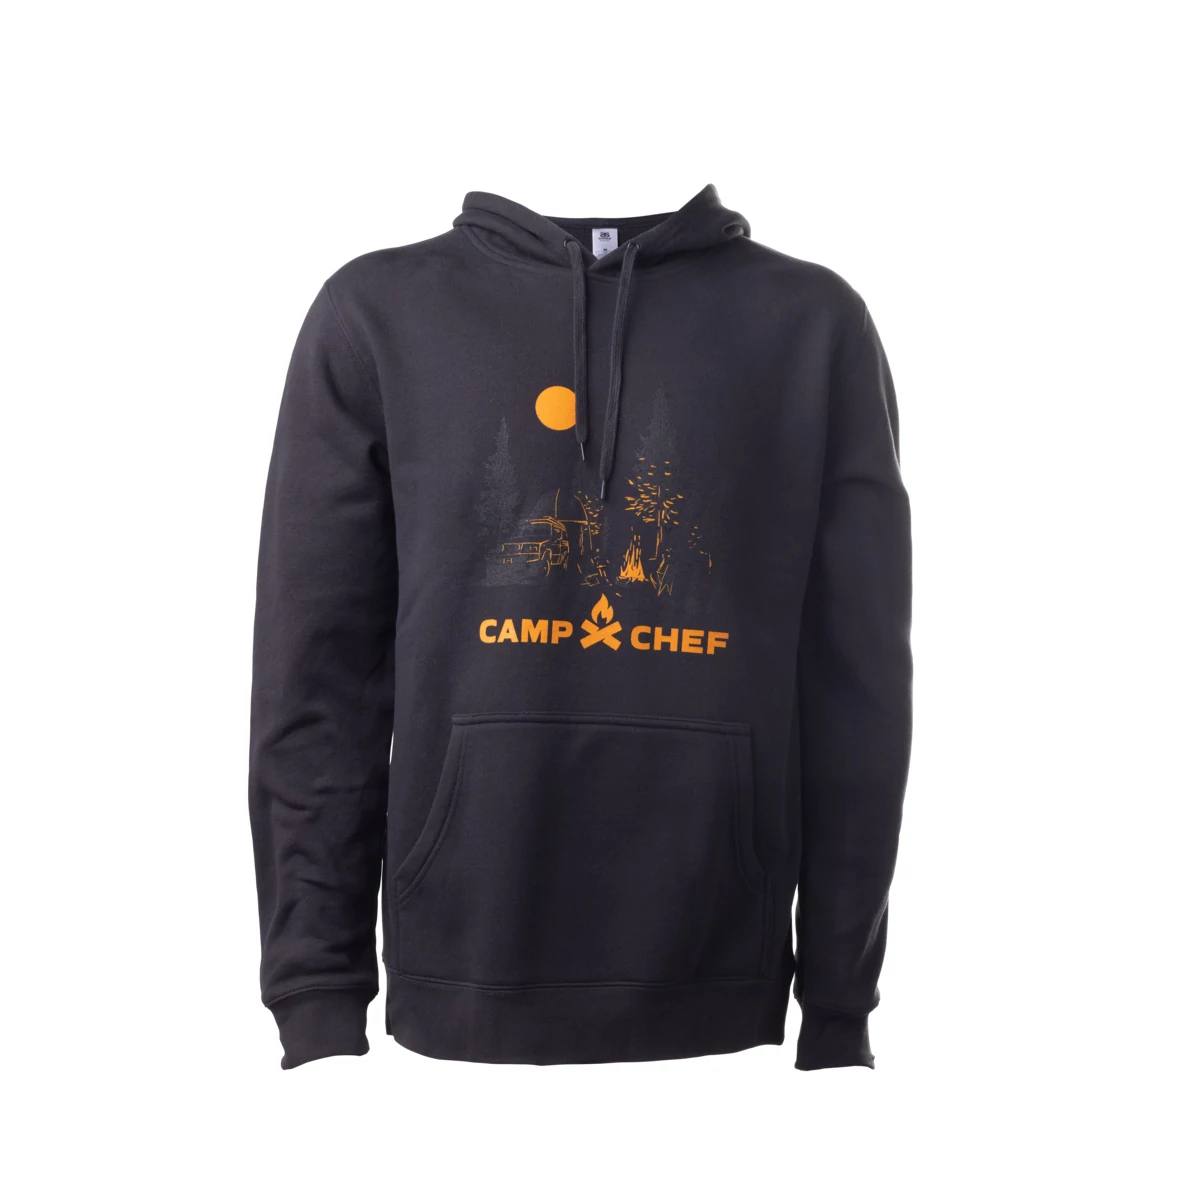 Camp Chef Campsite hoodie - S